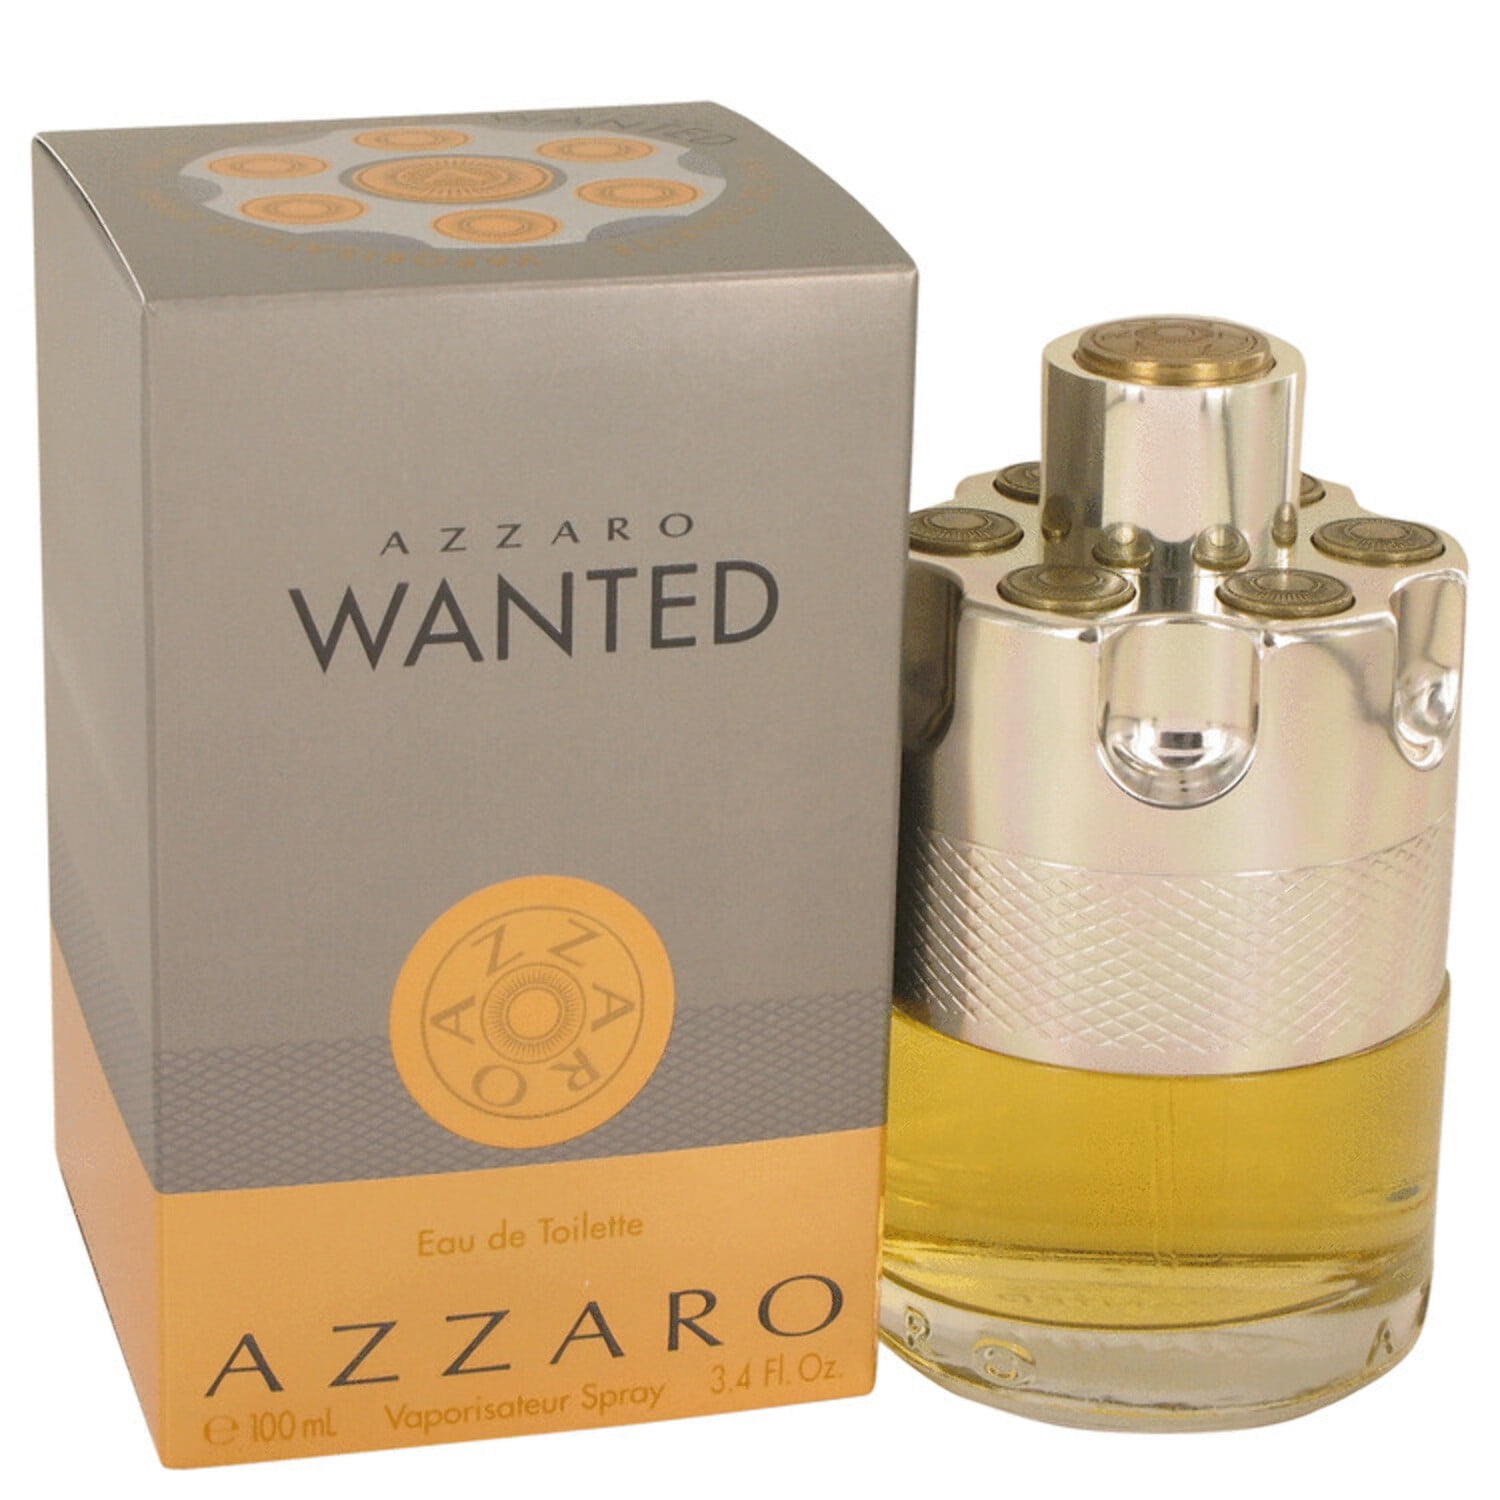 Azzaro Cologne for Men by Azzaro at ®